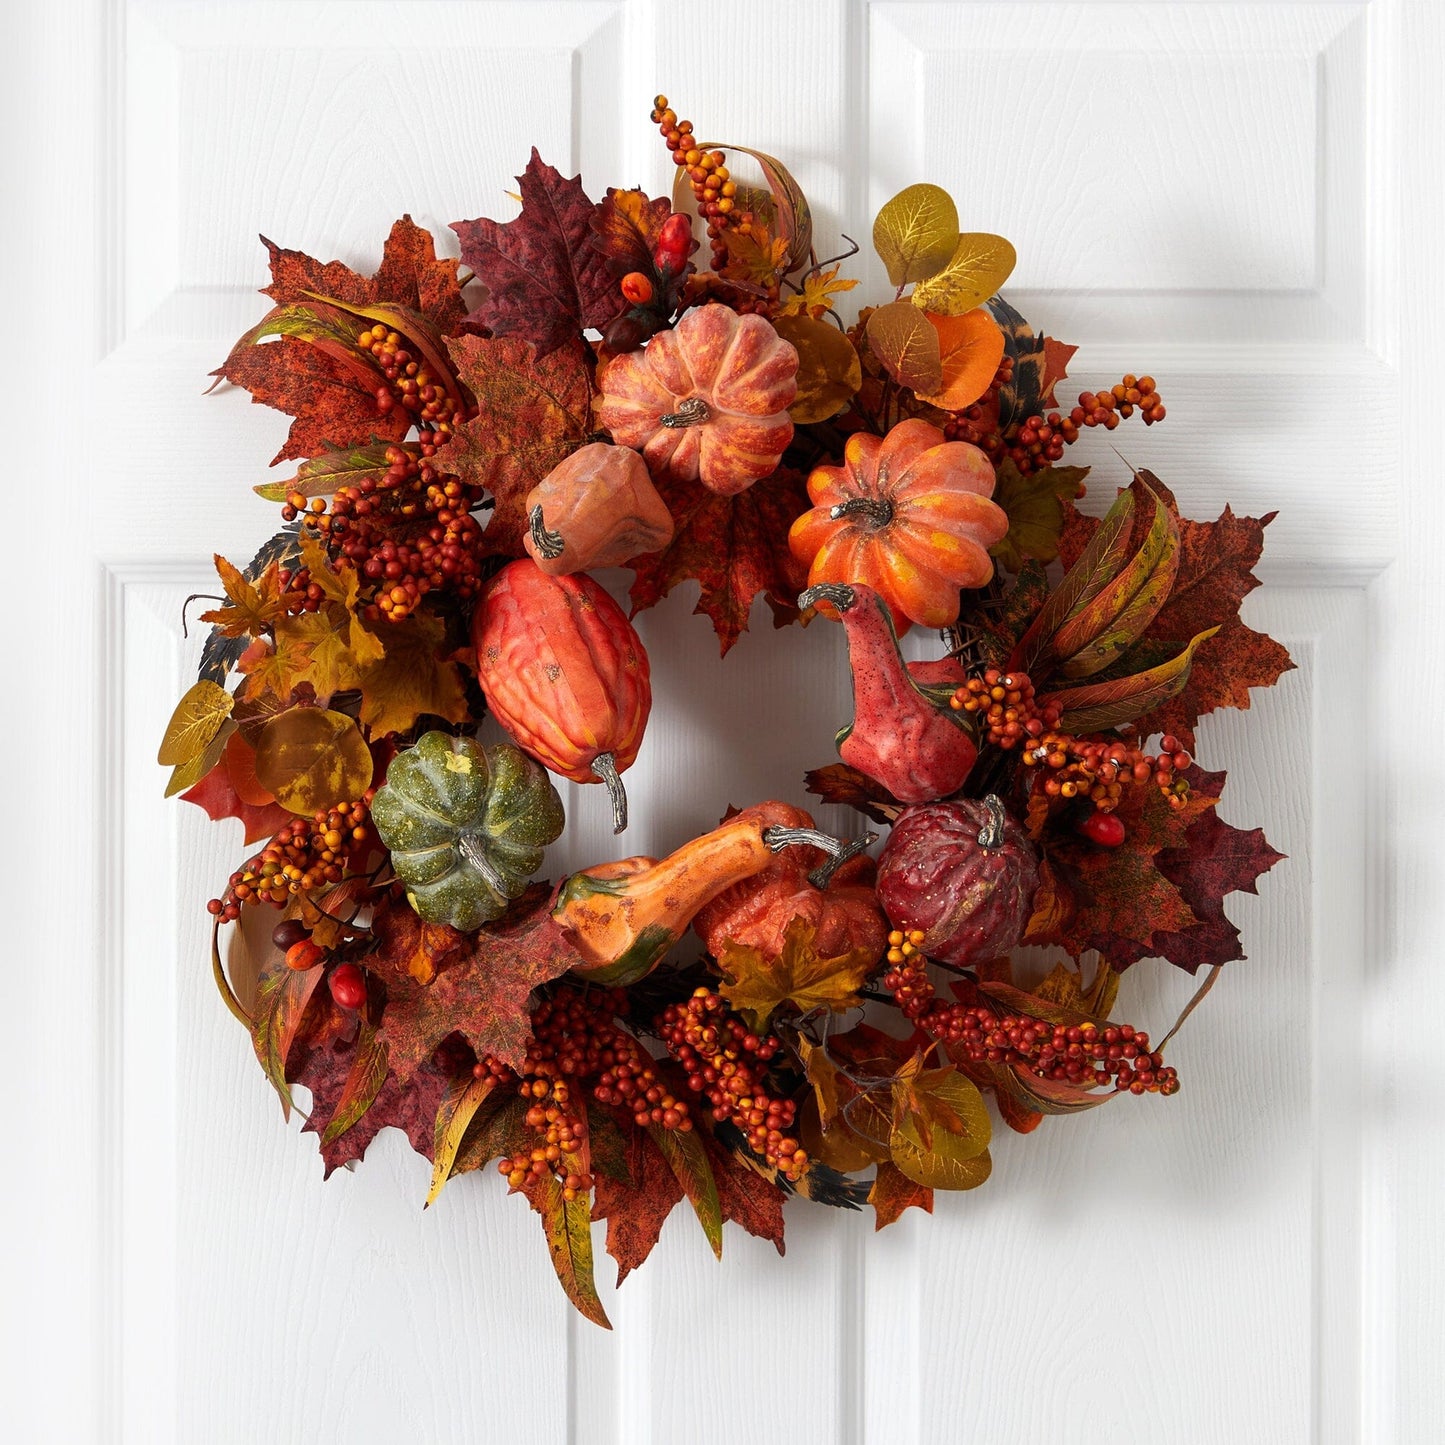 24" Pumpkin & Berry Wreath" by Nearly Natural